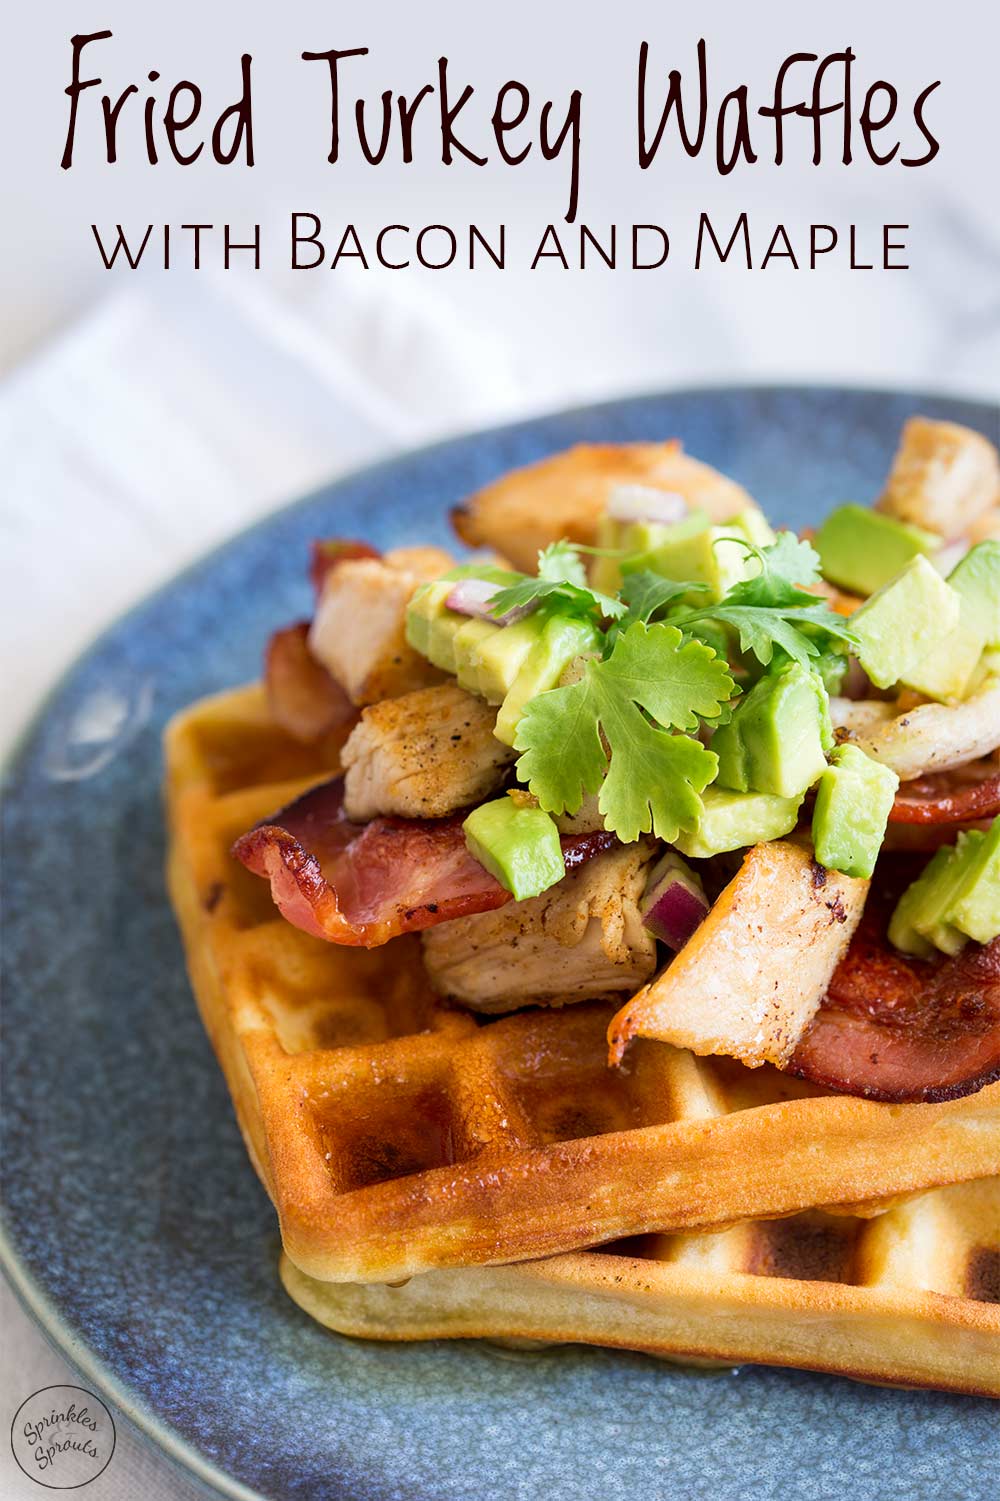 Pin Image: overhead view of the turkey waffles with text at the top